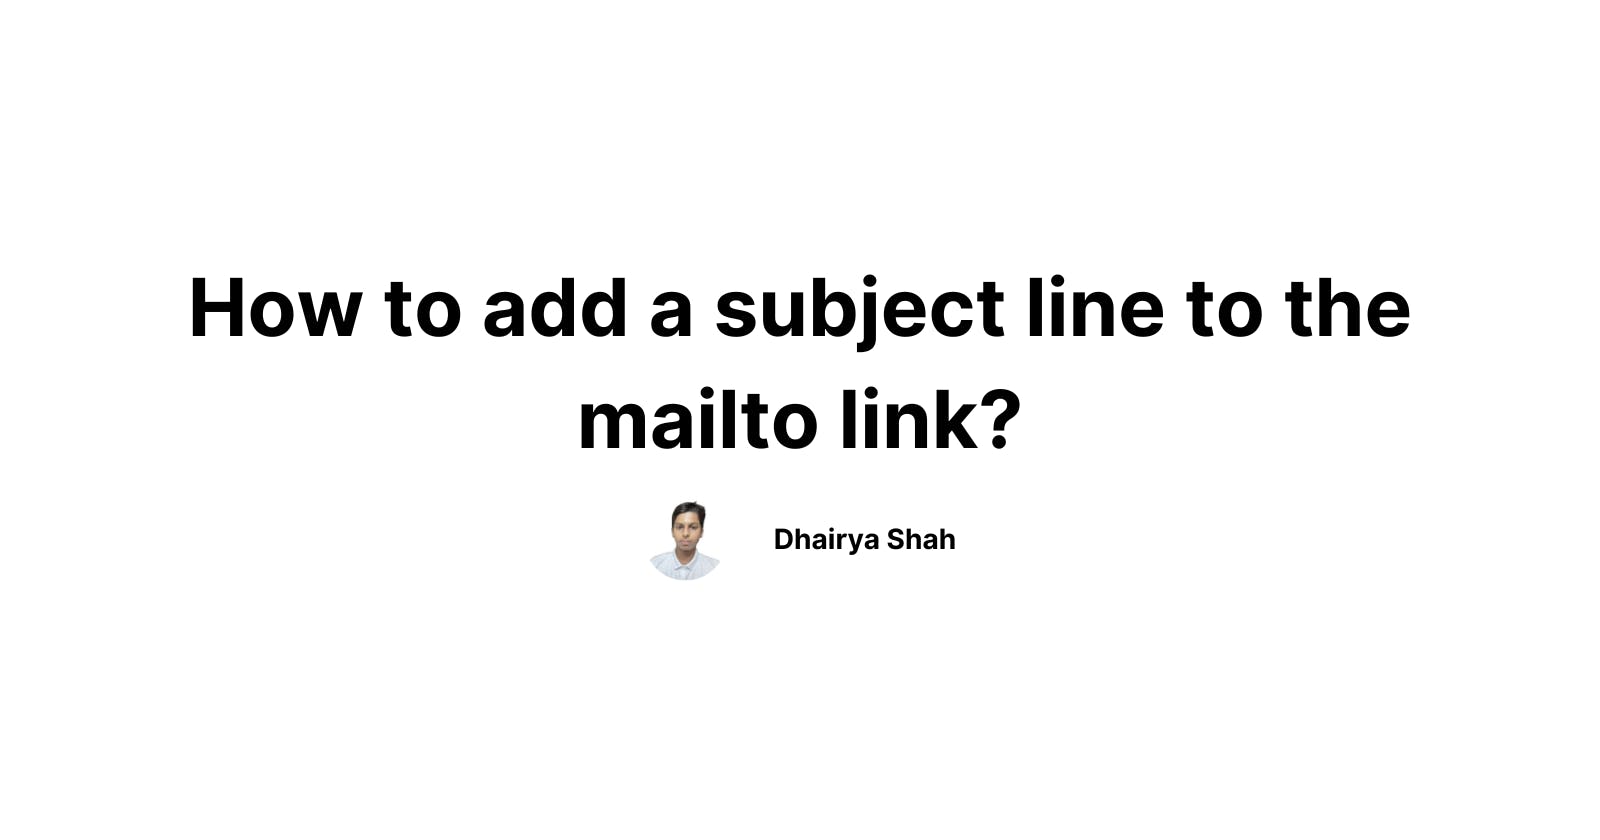 How to add a subject line to the mailto link?